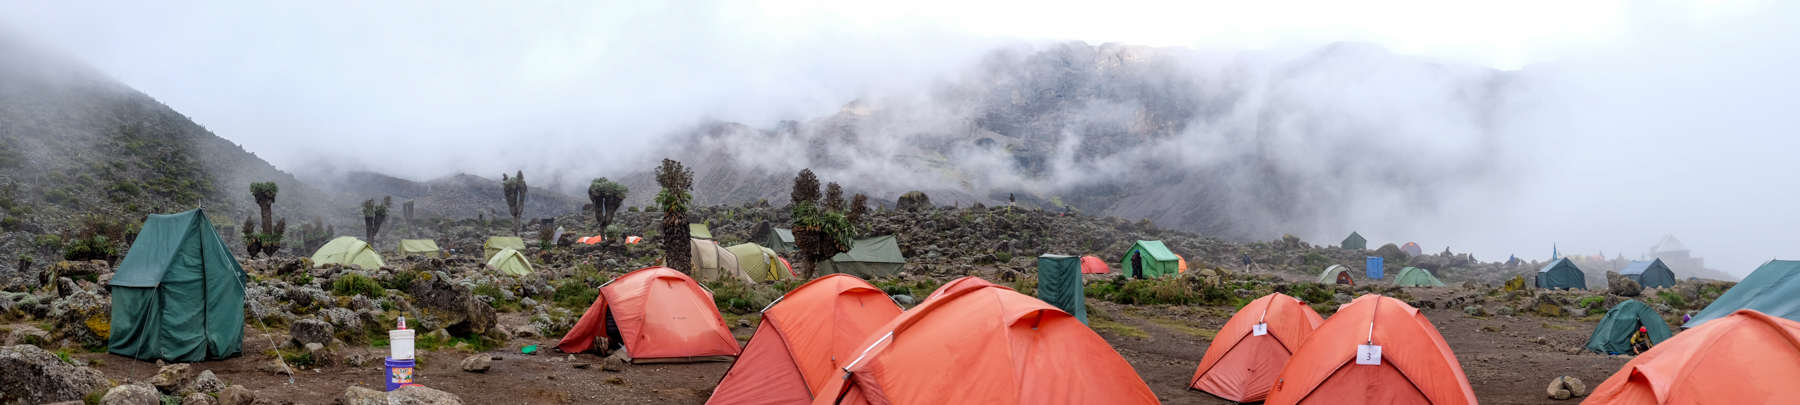 A line of orange tents and a green toilet tent set in the misty, tree valley of Barranco in Kilimanjaro.